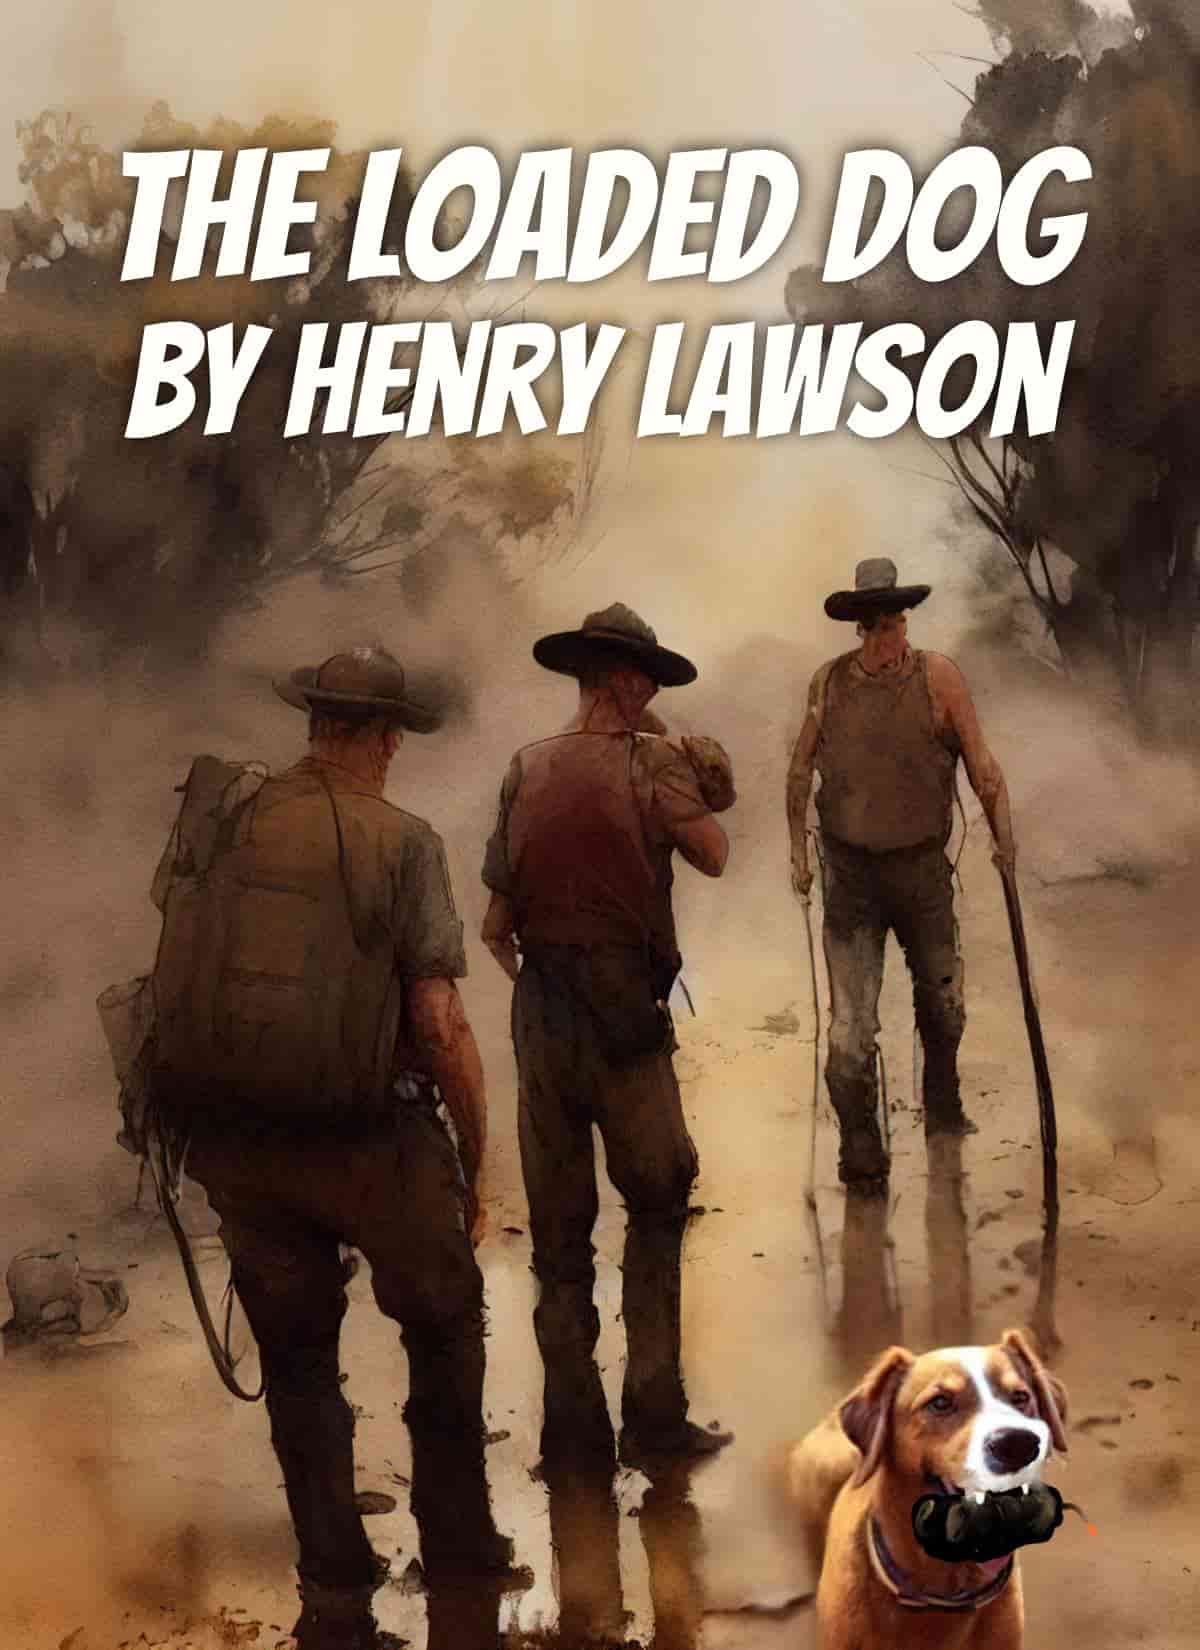 The Loaded Dog by Henry Lawson Short Story